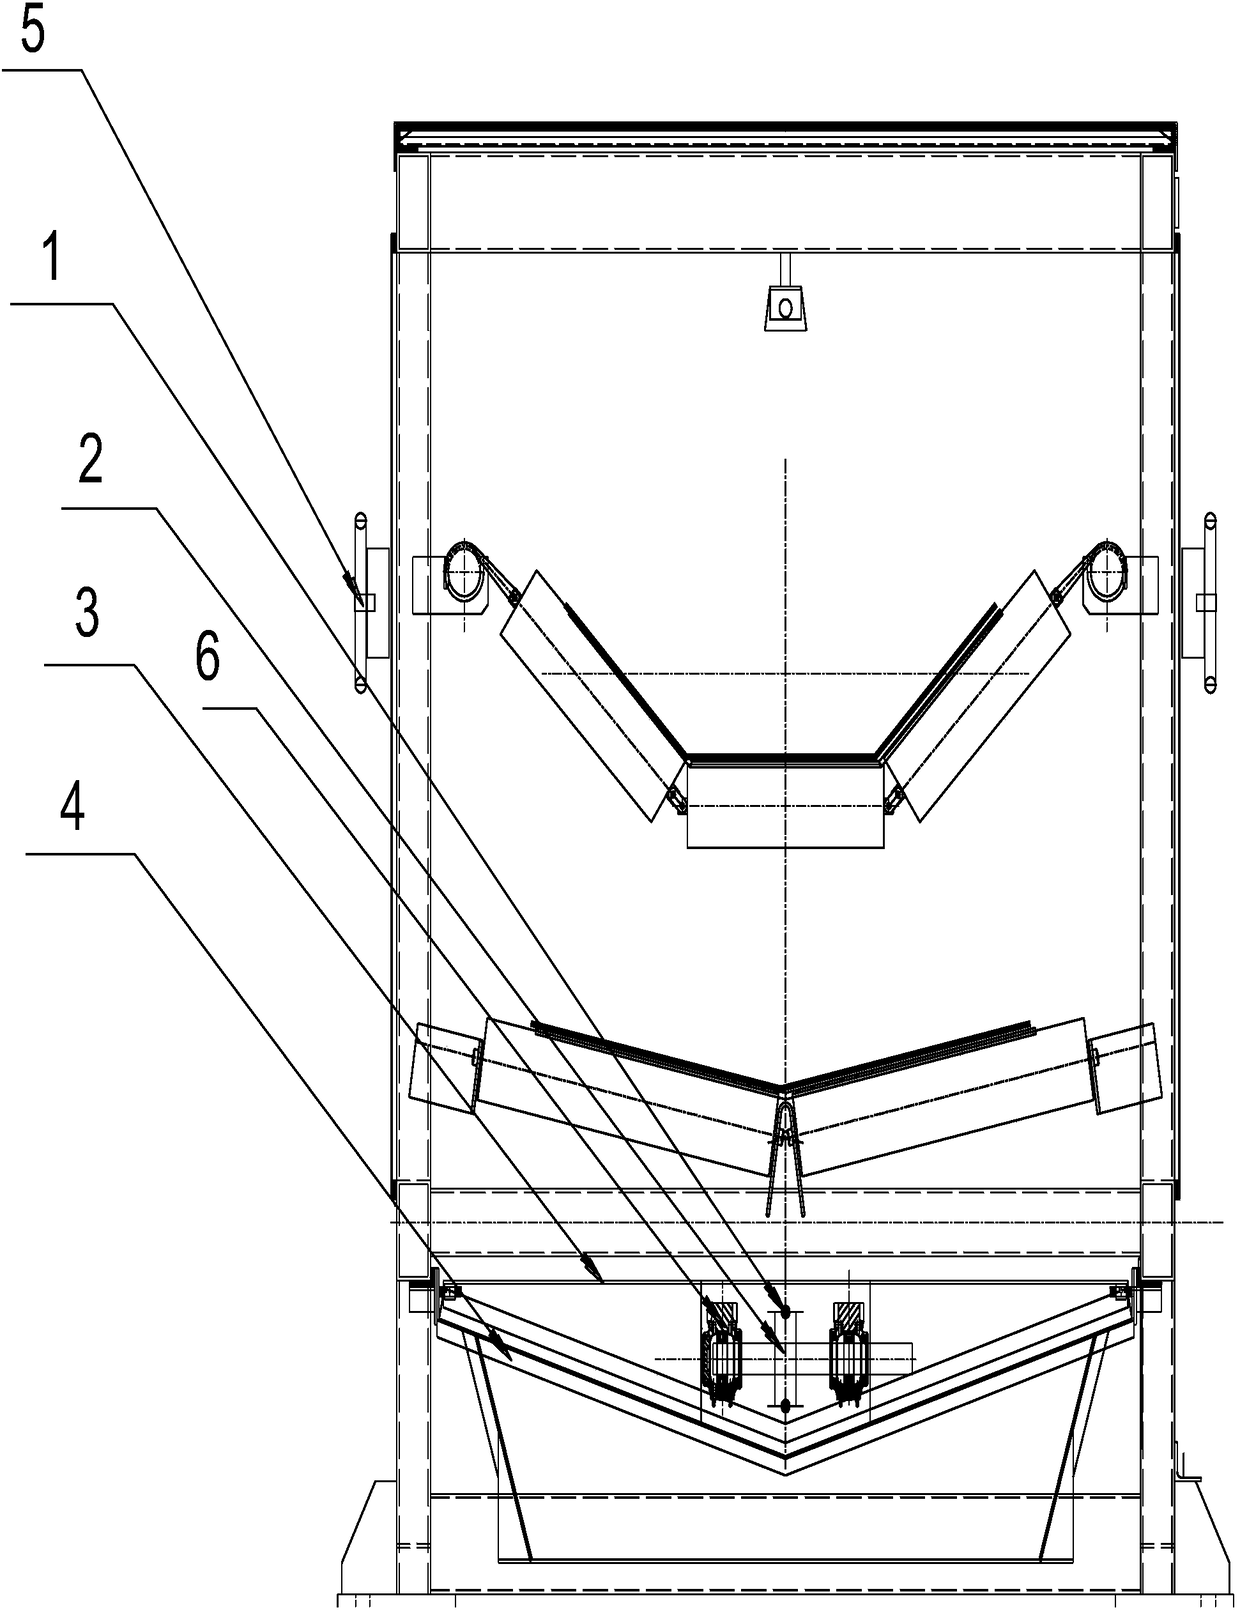 A material spreading and cleaning device for a belt conveyor